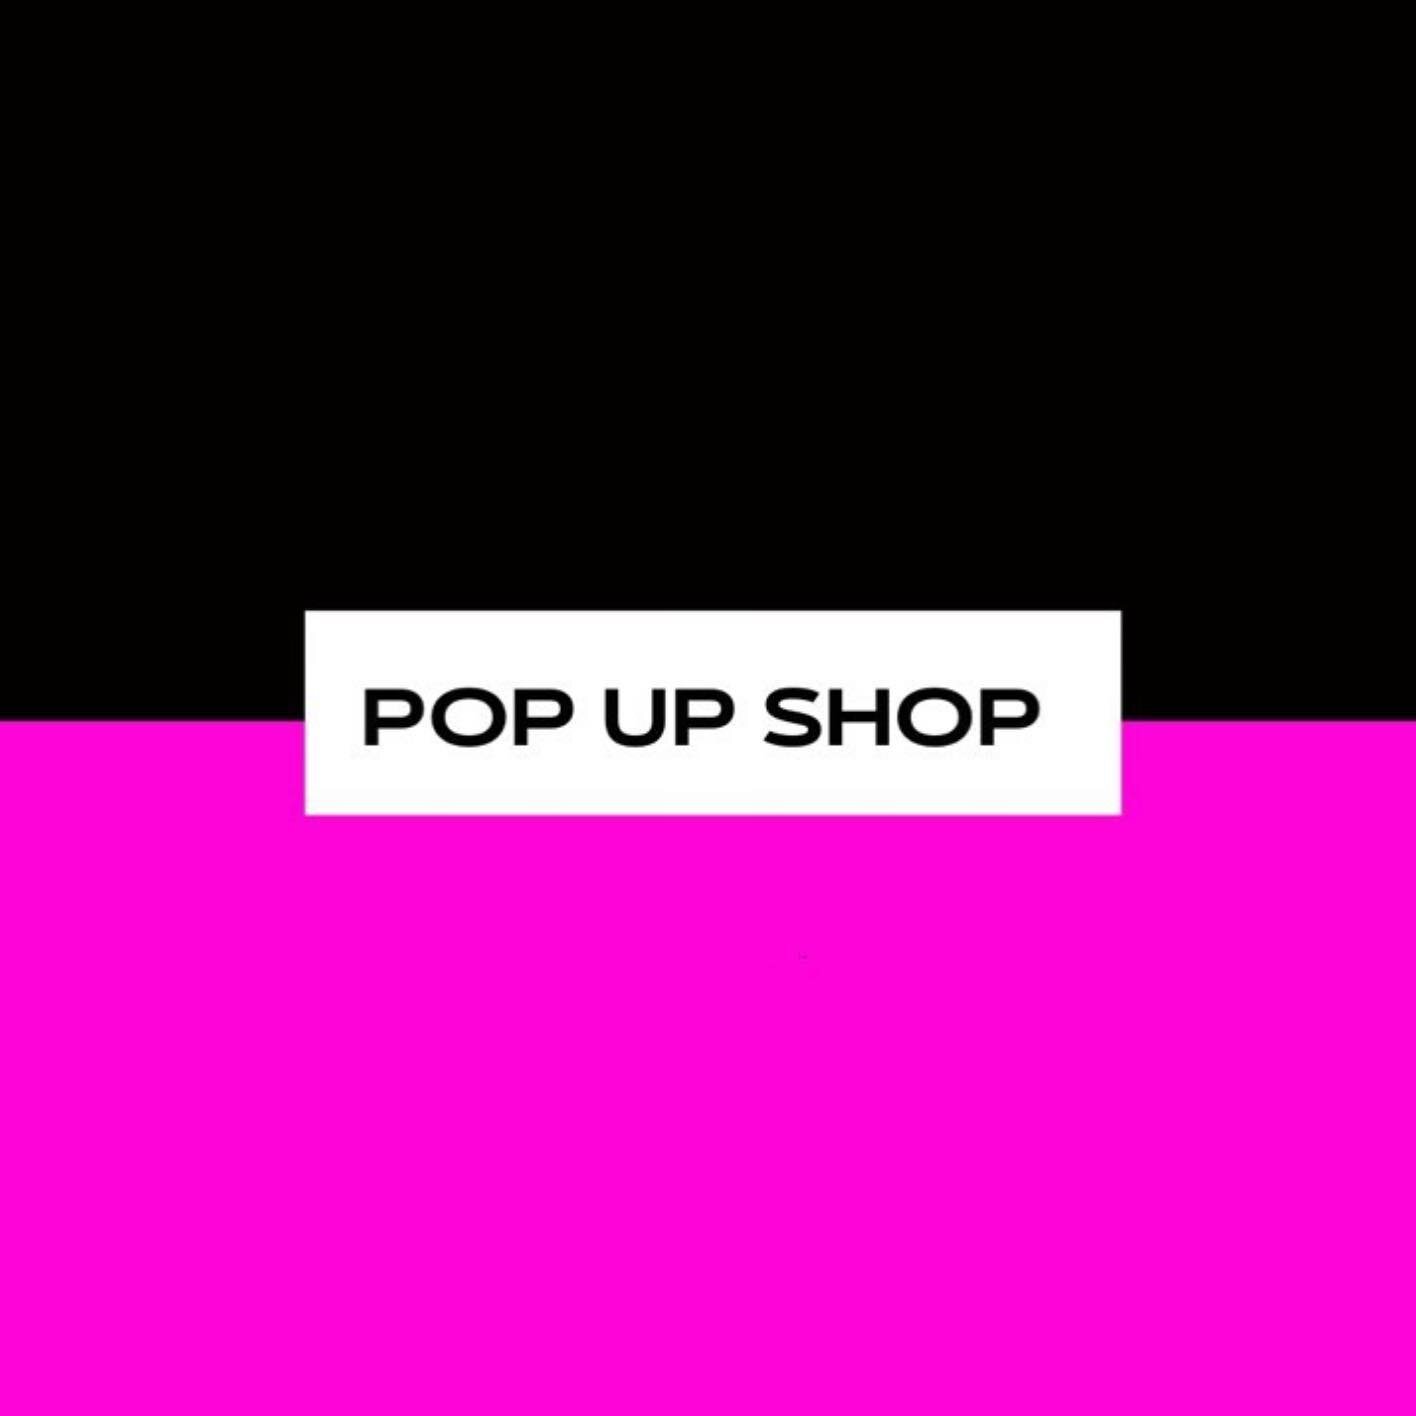 Want to shop with us in person?  Check our Pop Up Shop highlights every week to see when we will be popping up near you. 

#popupshop #dmvpopups #popupshopsdmv #pajamaboutique #shopinpersonsafely #shopinperson #campsprings #baltimore #templehills #wa